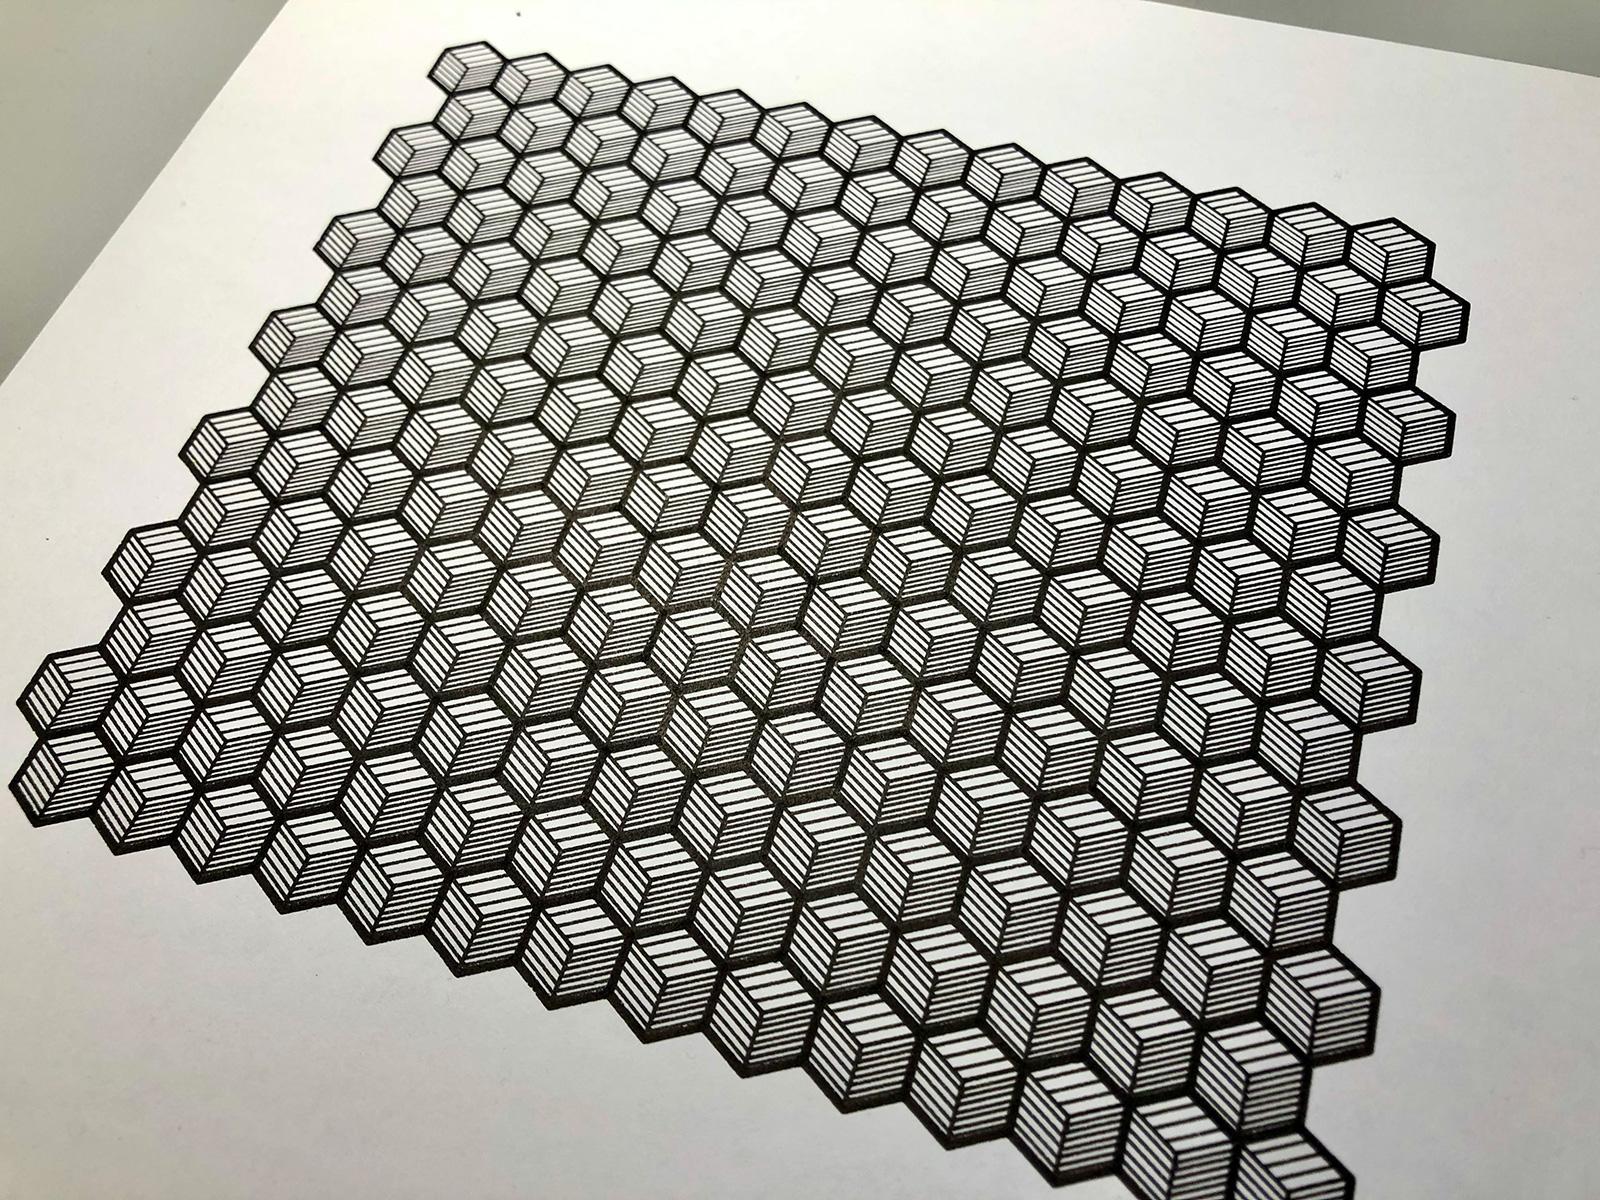 The same pattern as before but with simplified hatching, without the spacing between the grid items